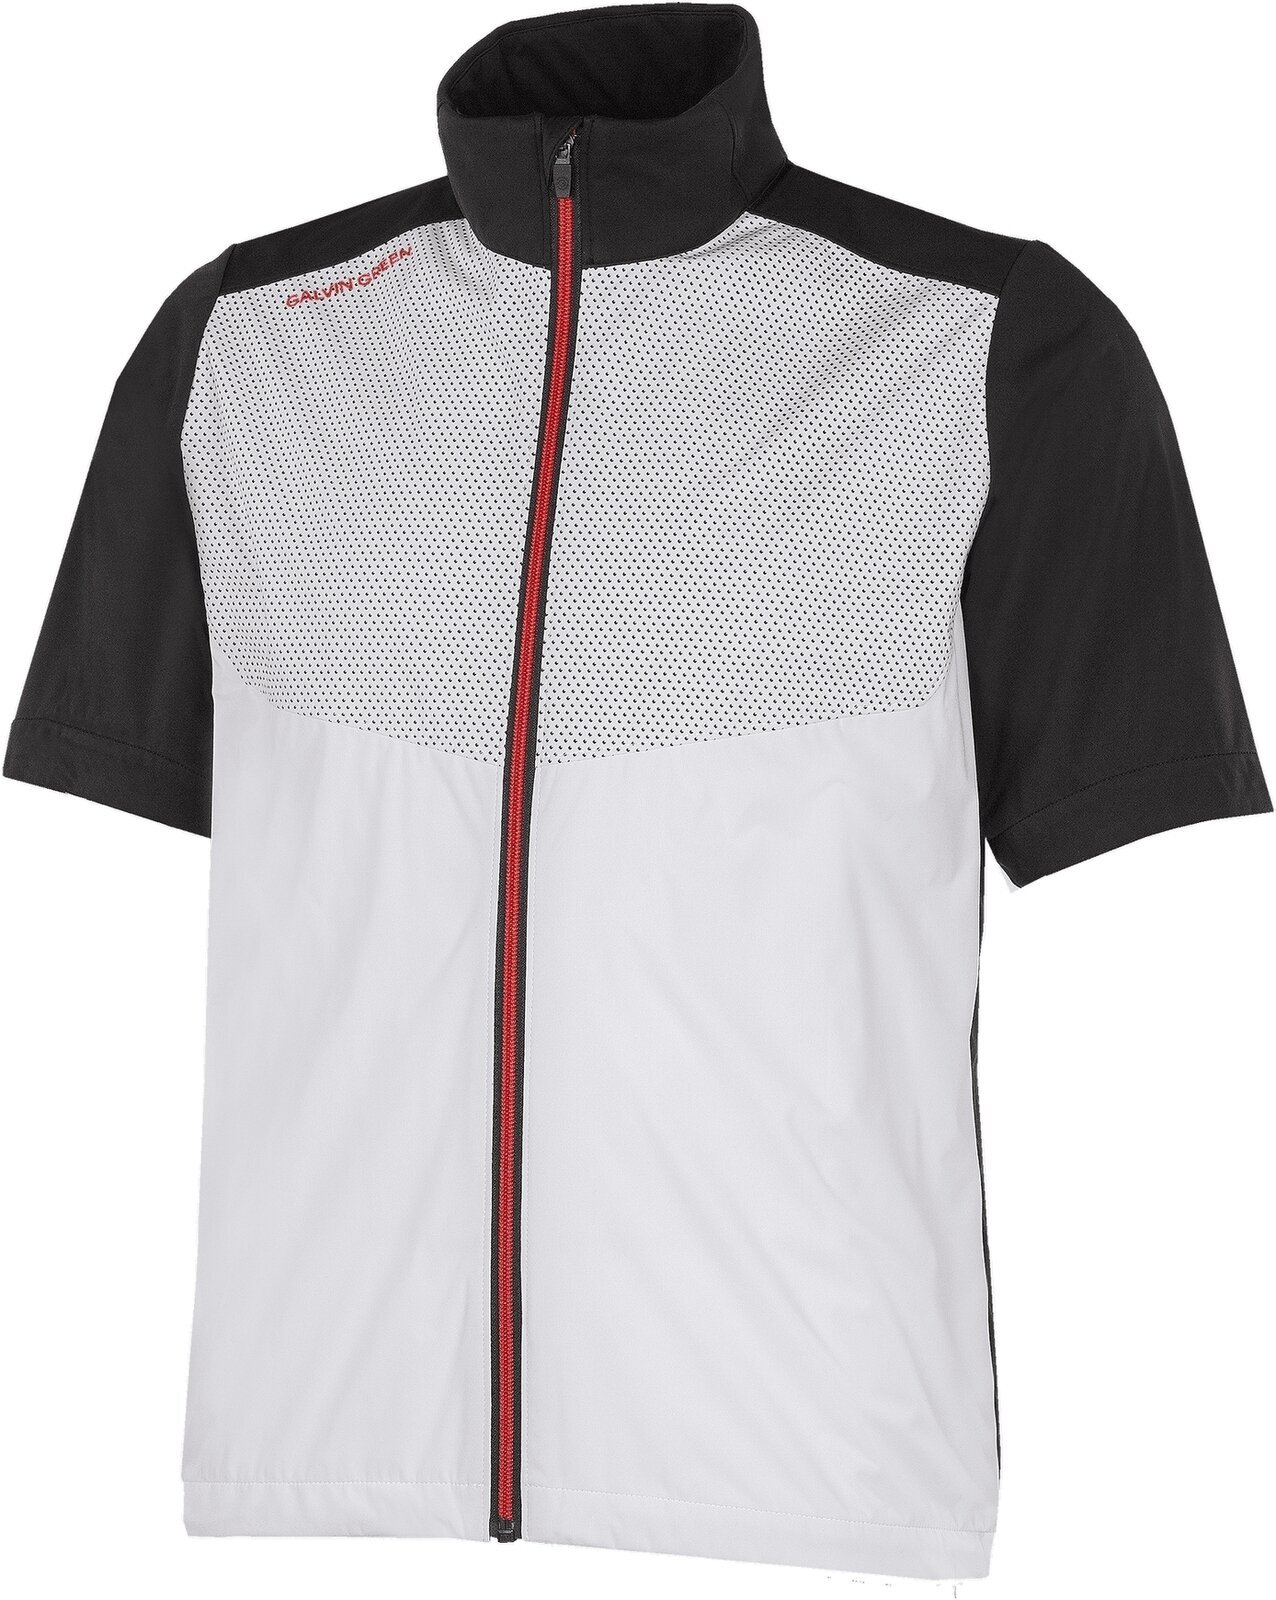 Jaqueta Galvin Green Livingston Mens Windproof And Water Repellent Short Sleeve Jacket White/Black/Red 2XL